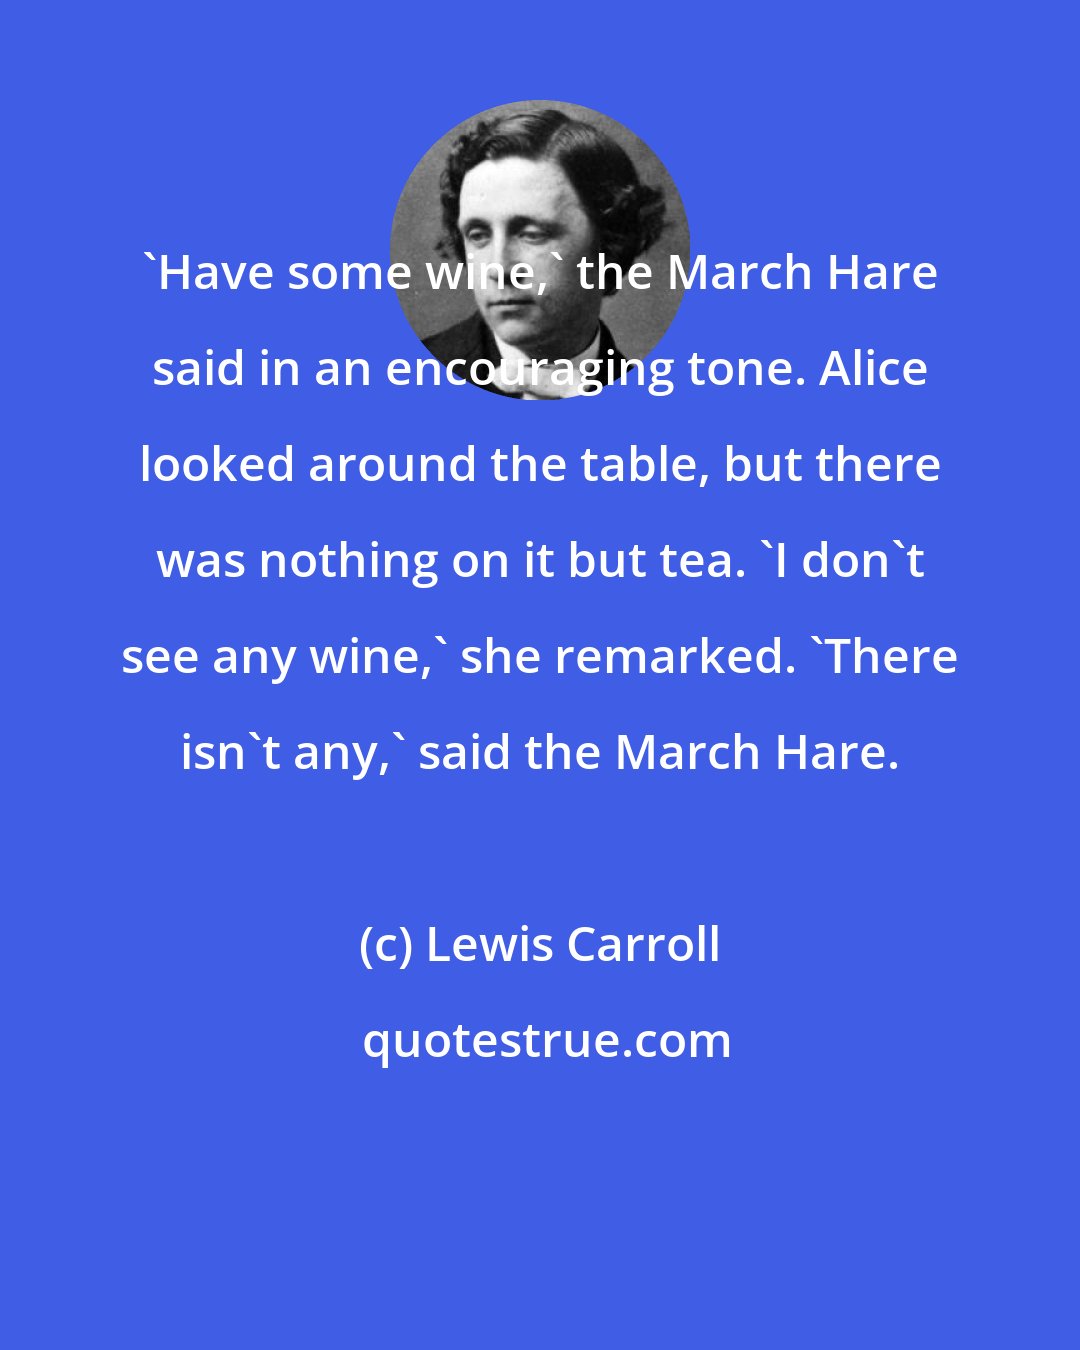 Lewis Carroll: 'Have some wine,' the March Hare said in an encouraging tone. Alice looked around the table, but there was nothing on it but tea. 'I don't see any wine,' she remarked. 'There isn't any,' said the March Hare.